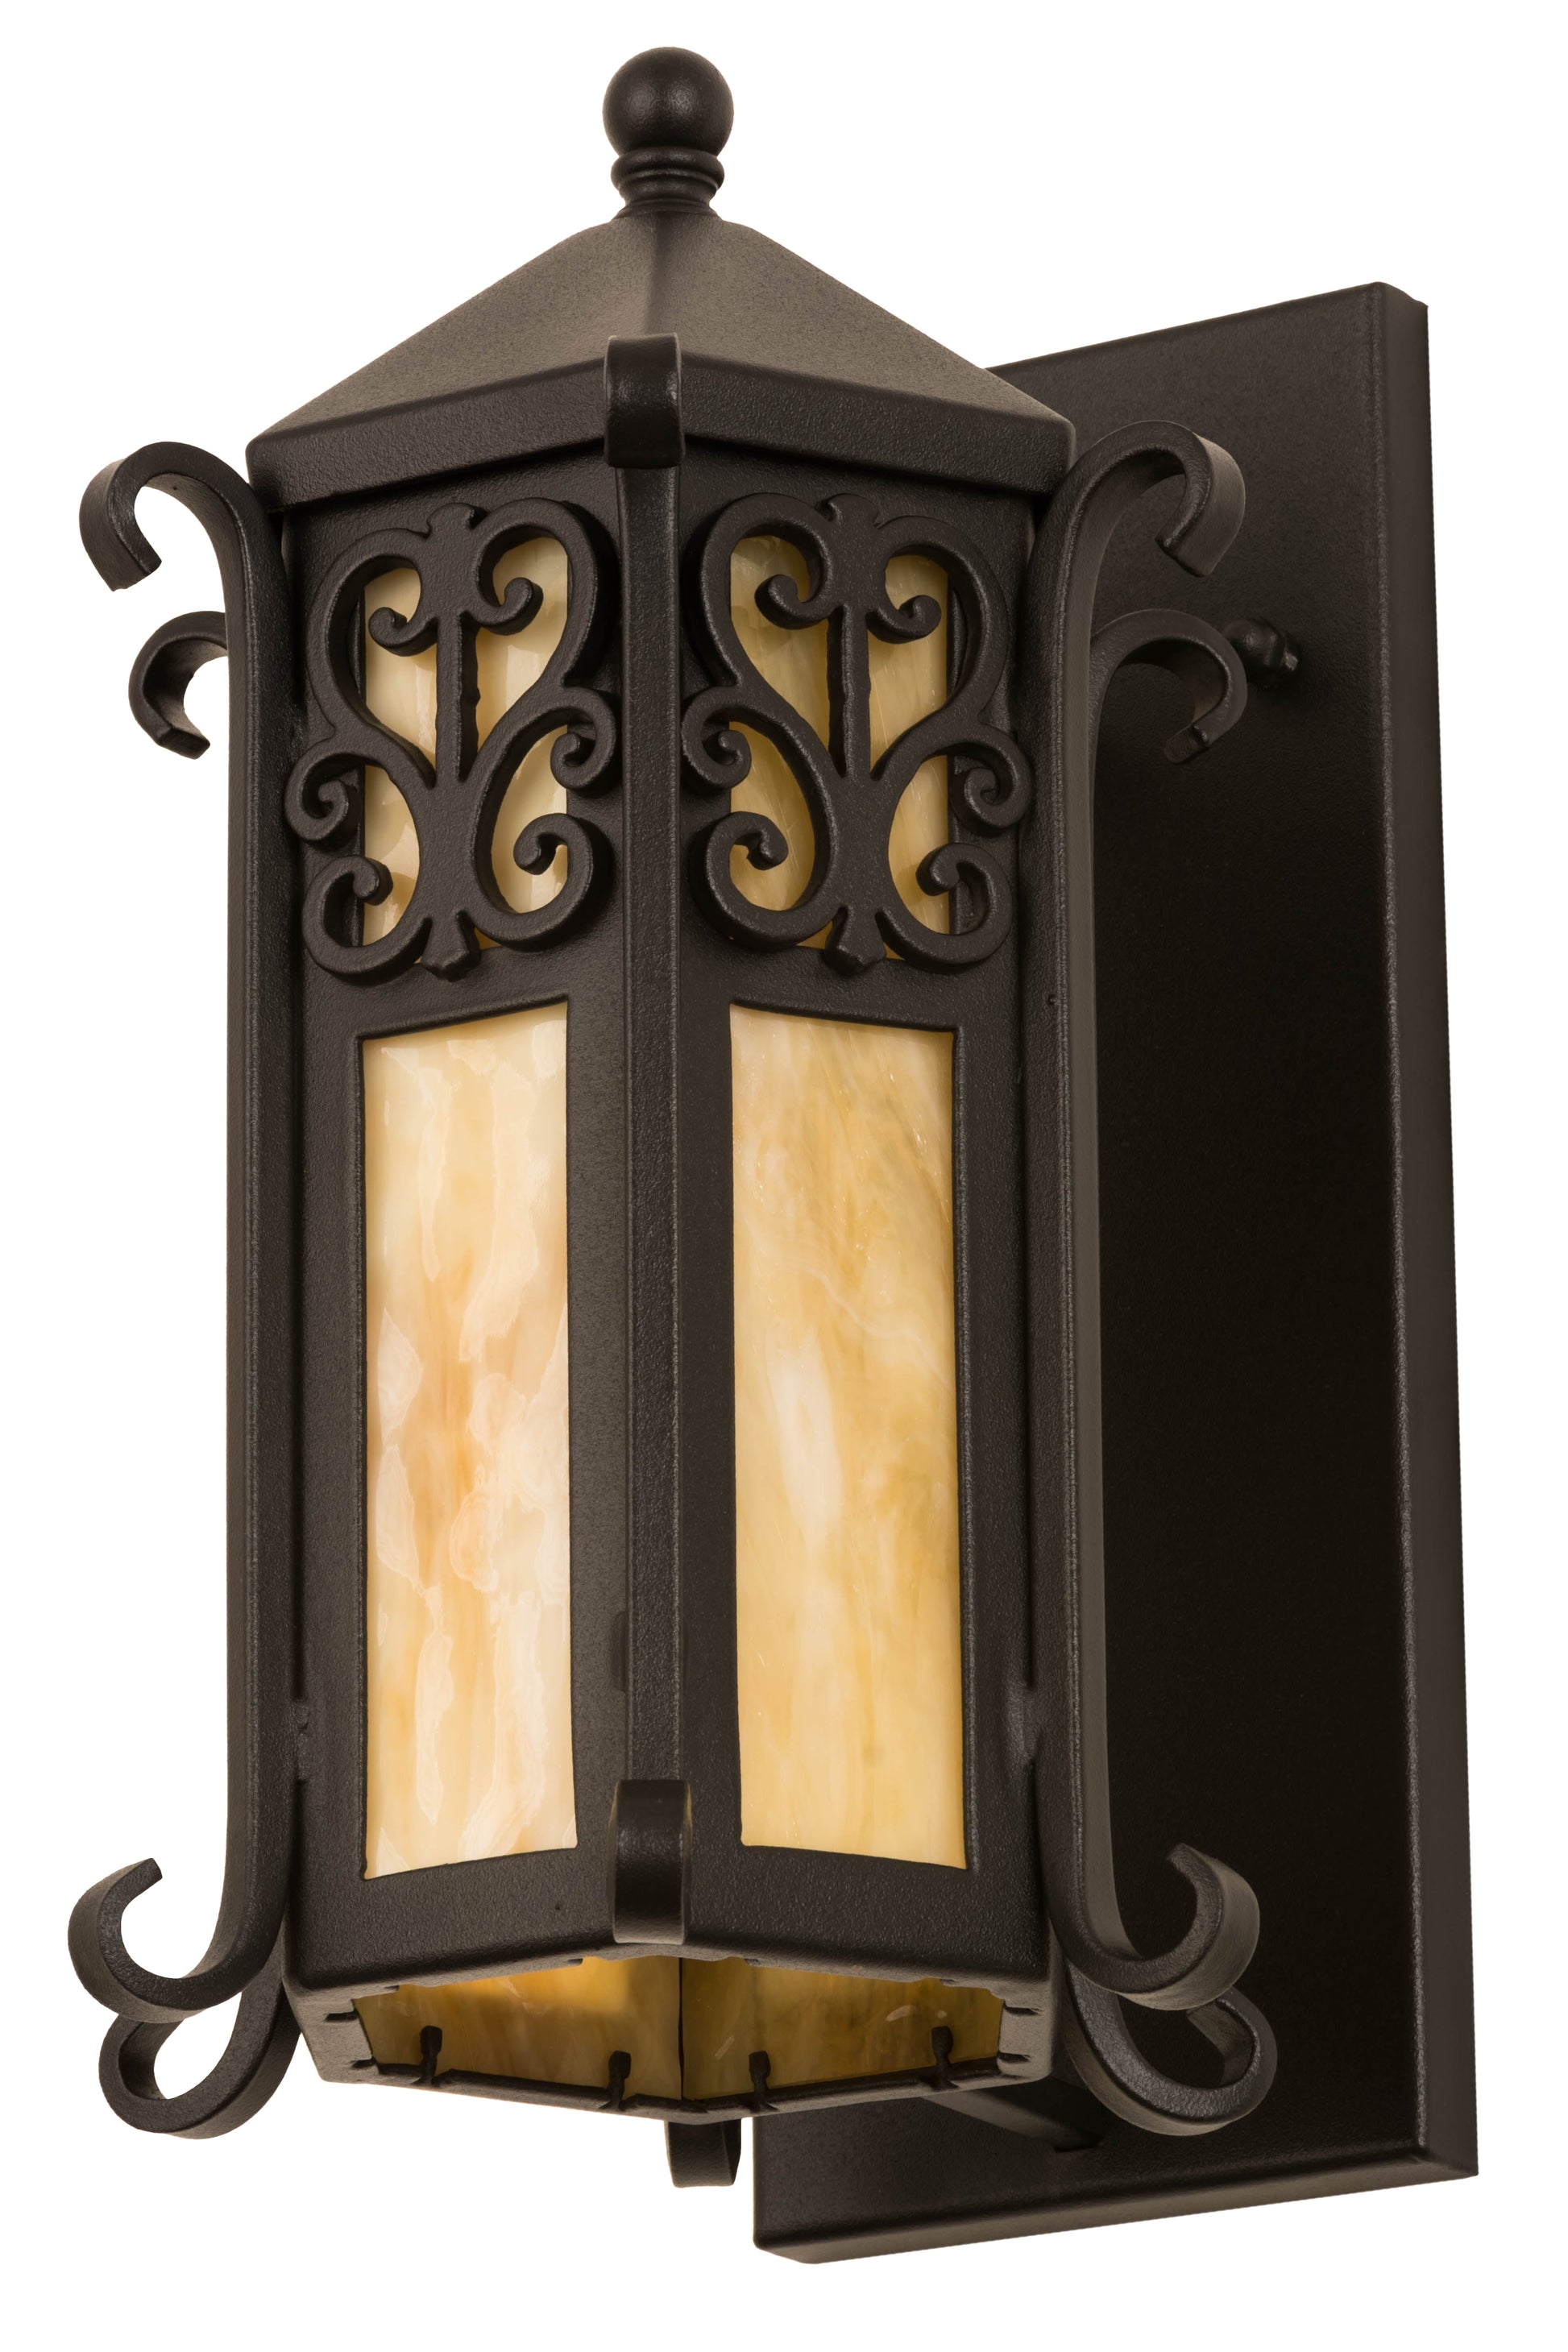 9" Caprice Lantern Wall Sconce by 2nd Ave Lighting